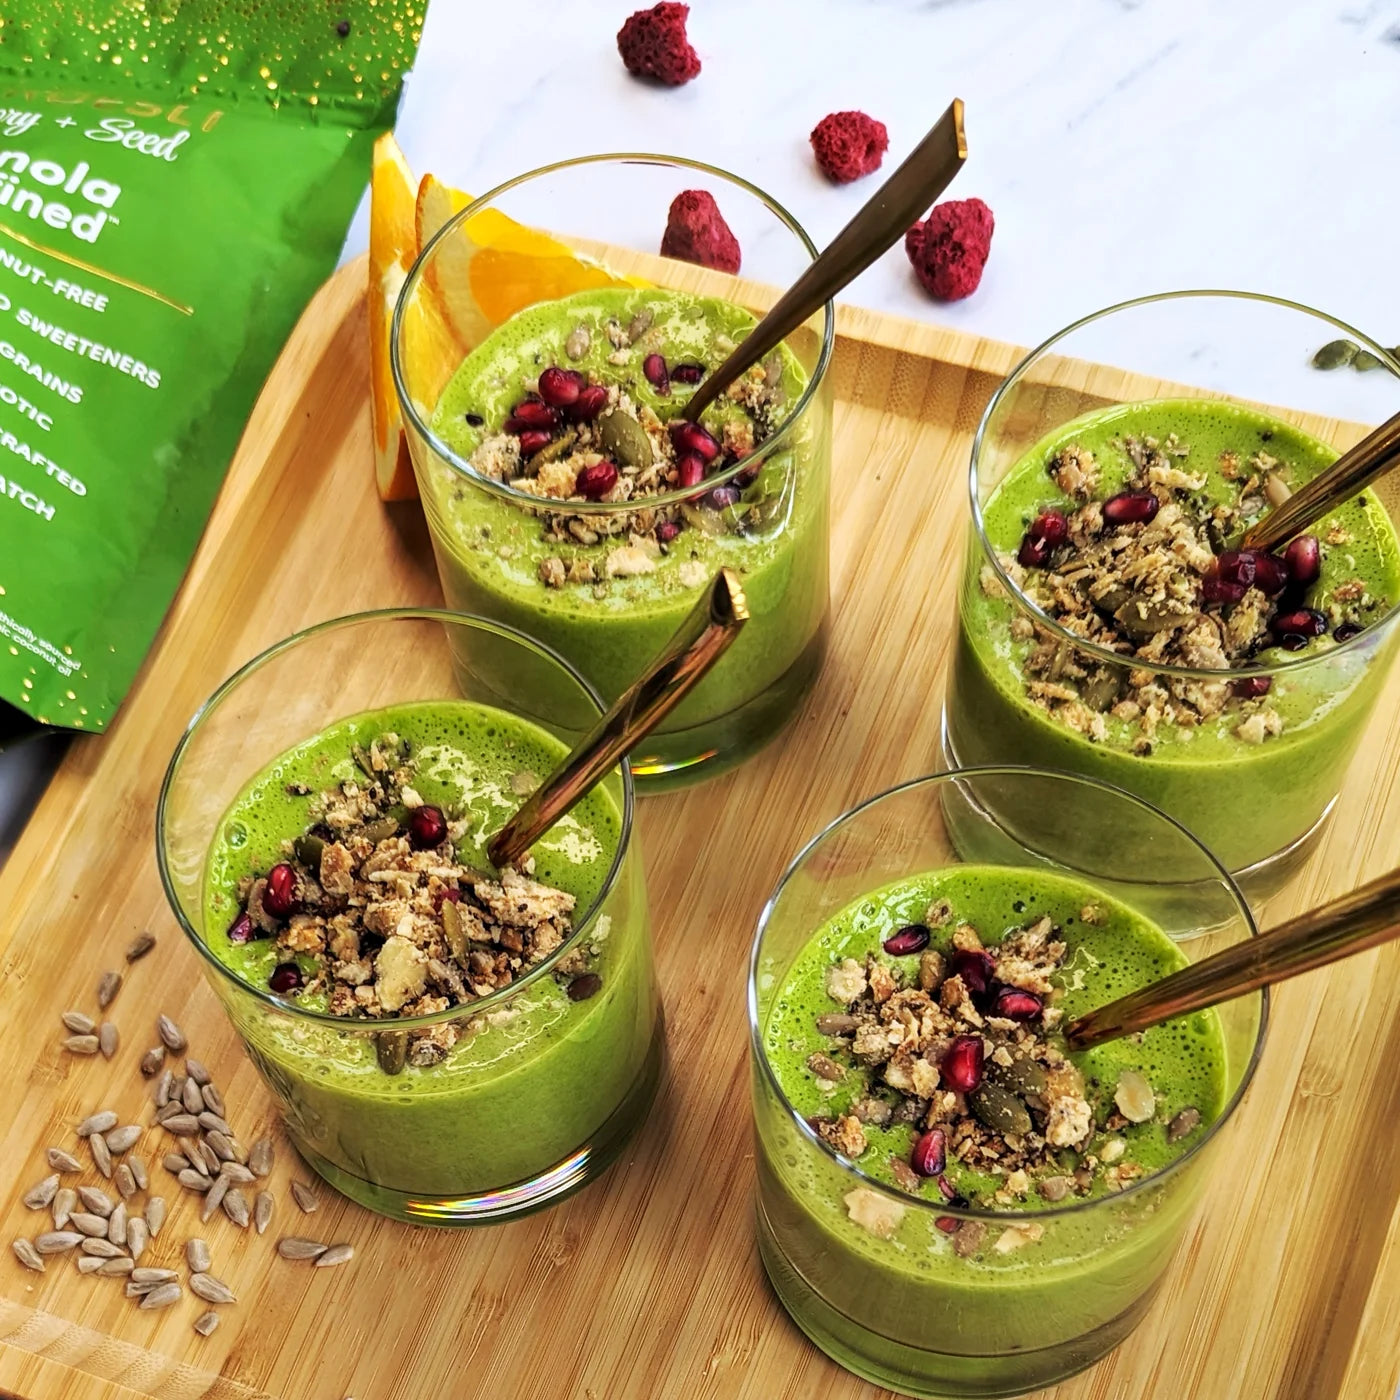 Rich and creamy matcha smoothies topped with Struesli's savory + seed granola.